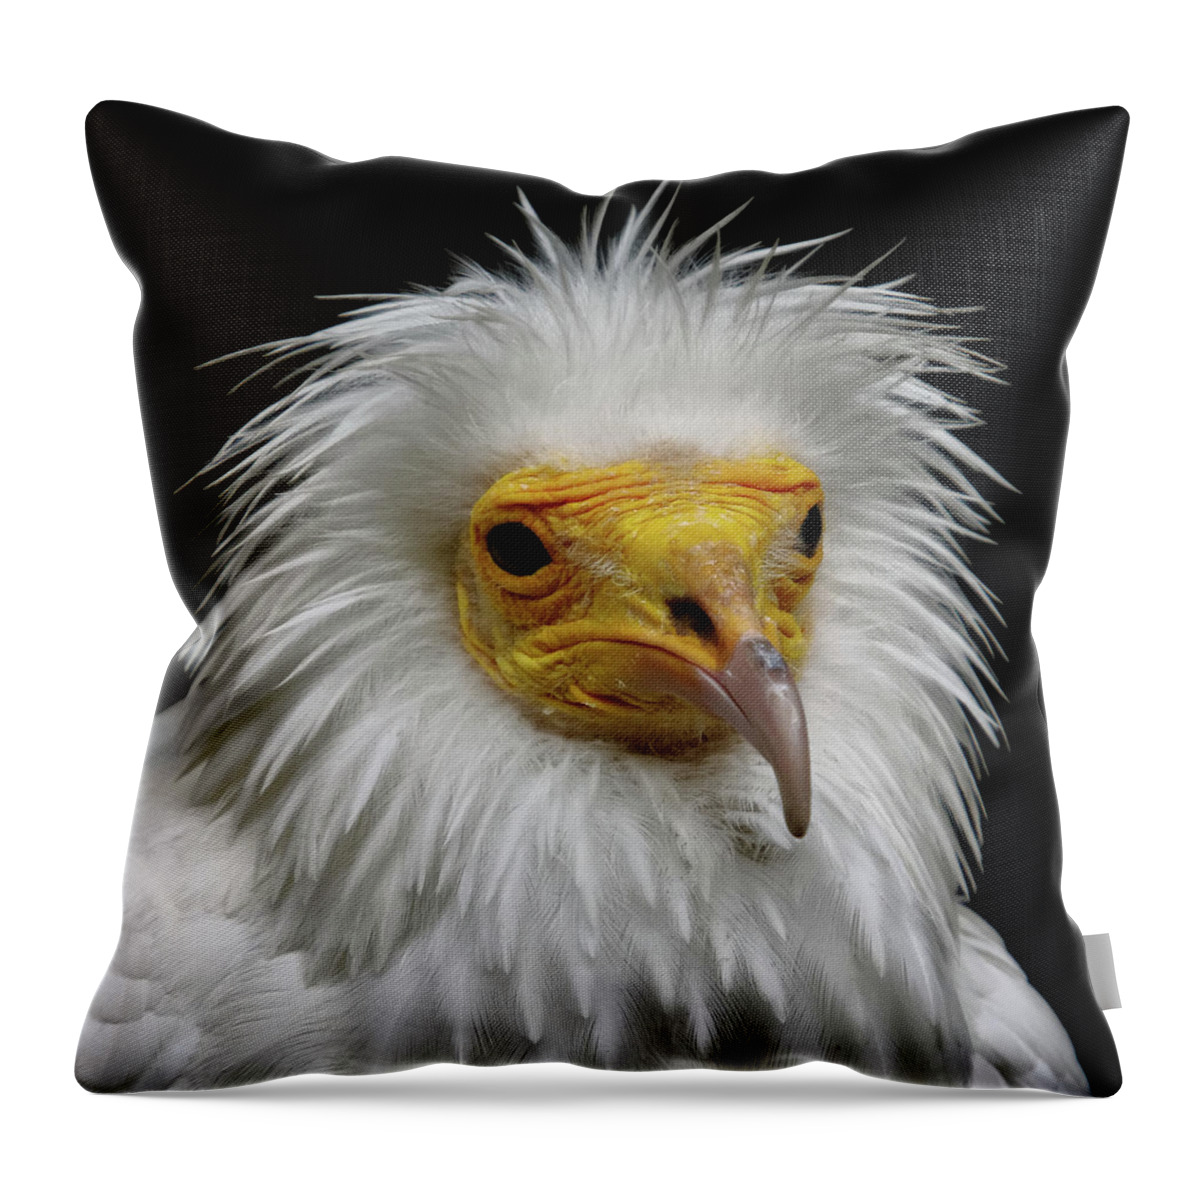 Animal Themes Throw Pillow featuring the photograph Egyptian Vulture by Jan Vogel